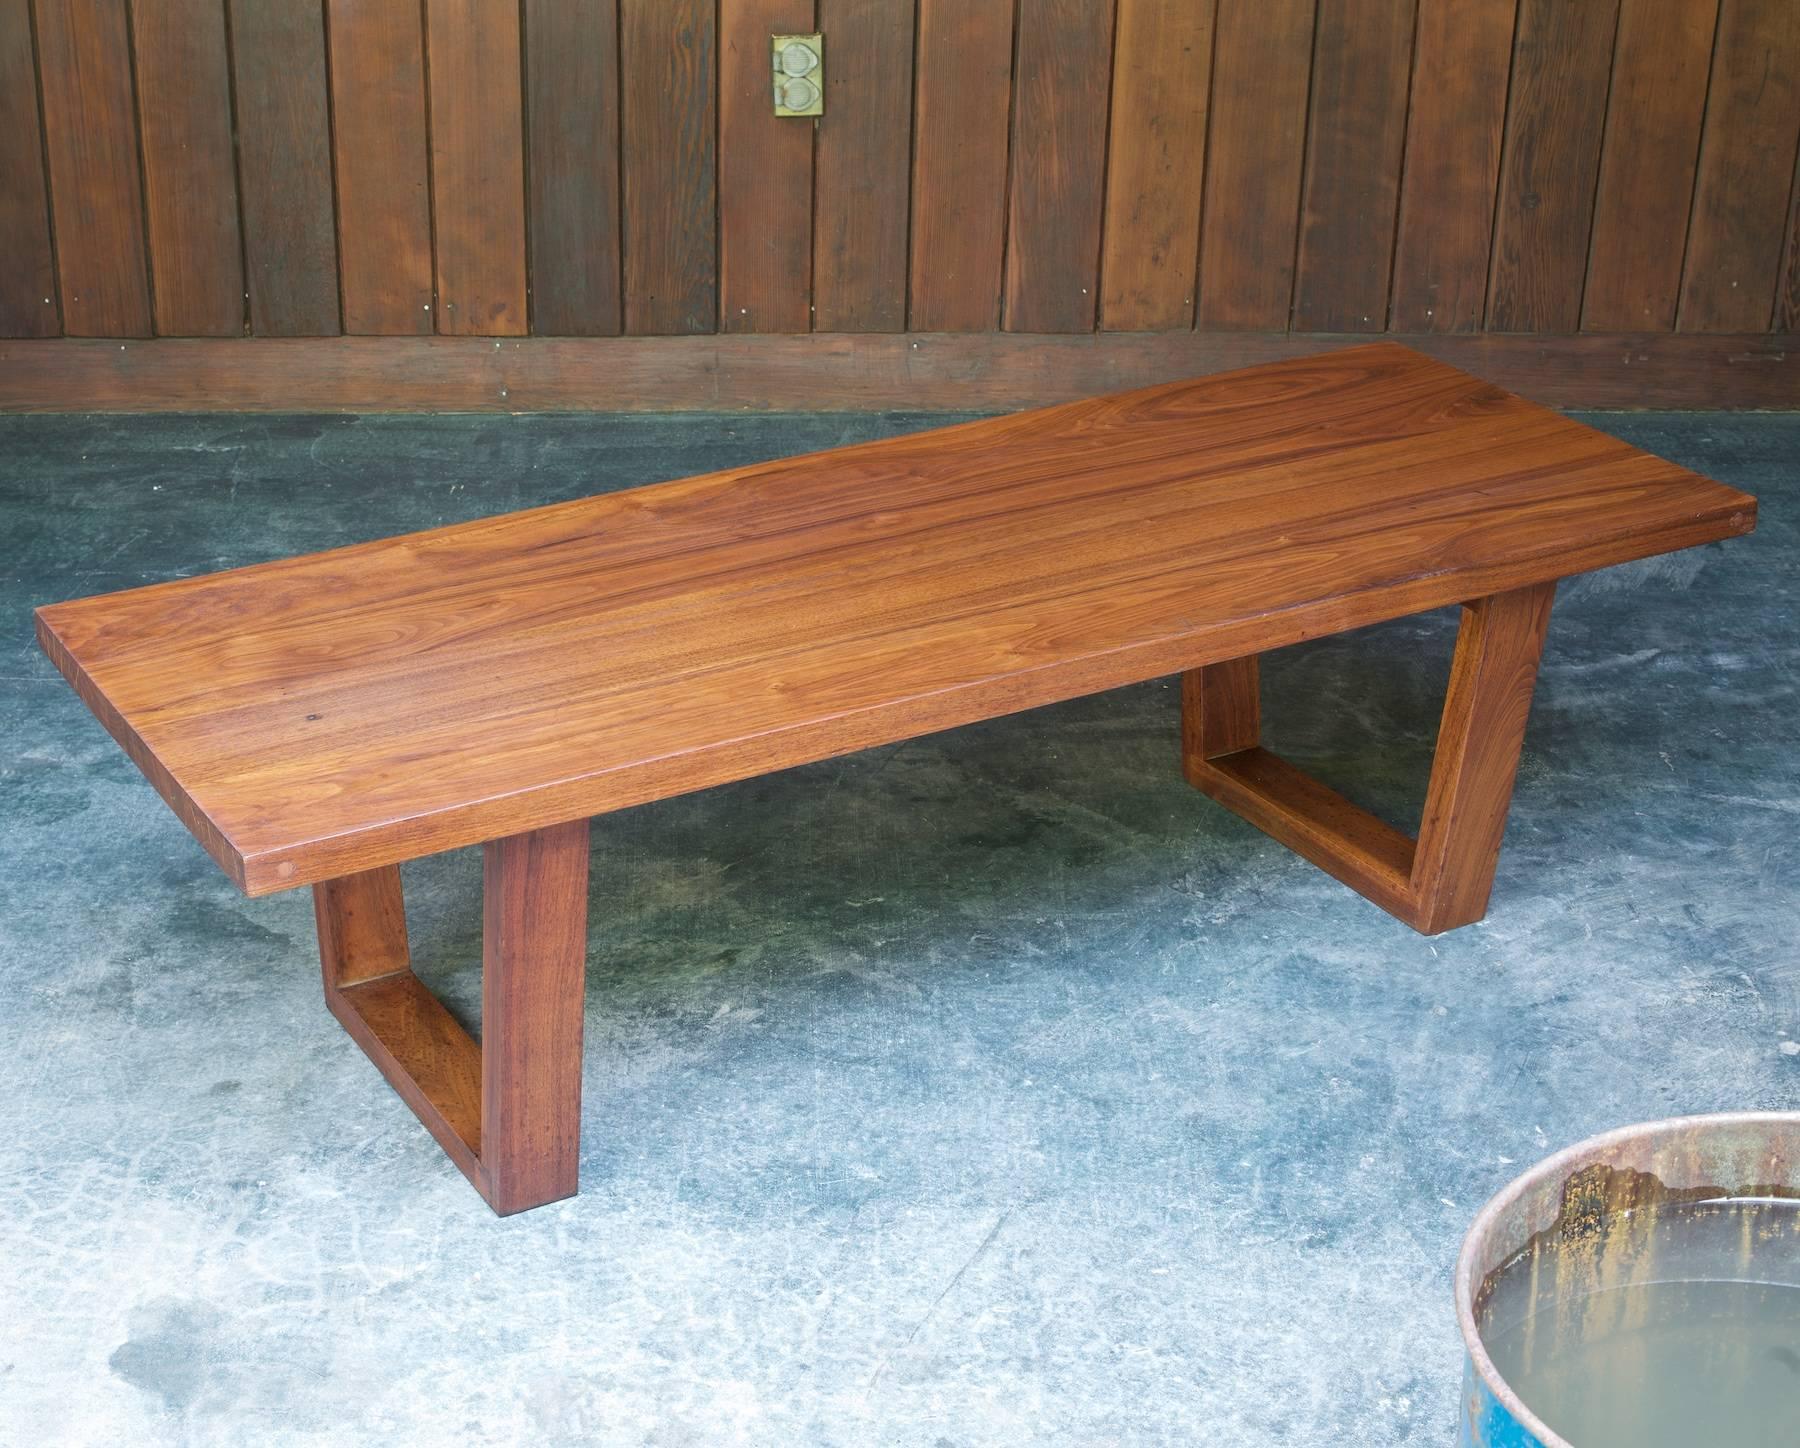 Very heavy, constructed of solid walnut. Original finish, so you see some wear from normal uses. Some splitting to top surface boards, some spalting (spotting) on the legs, and checking on the ends of the planks. This is all standard with very old